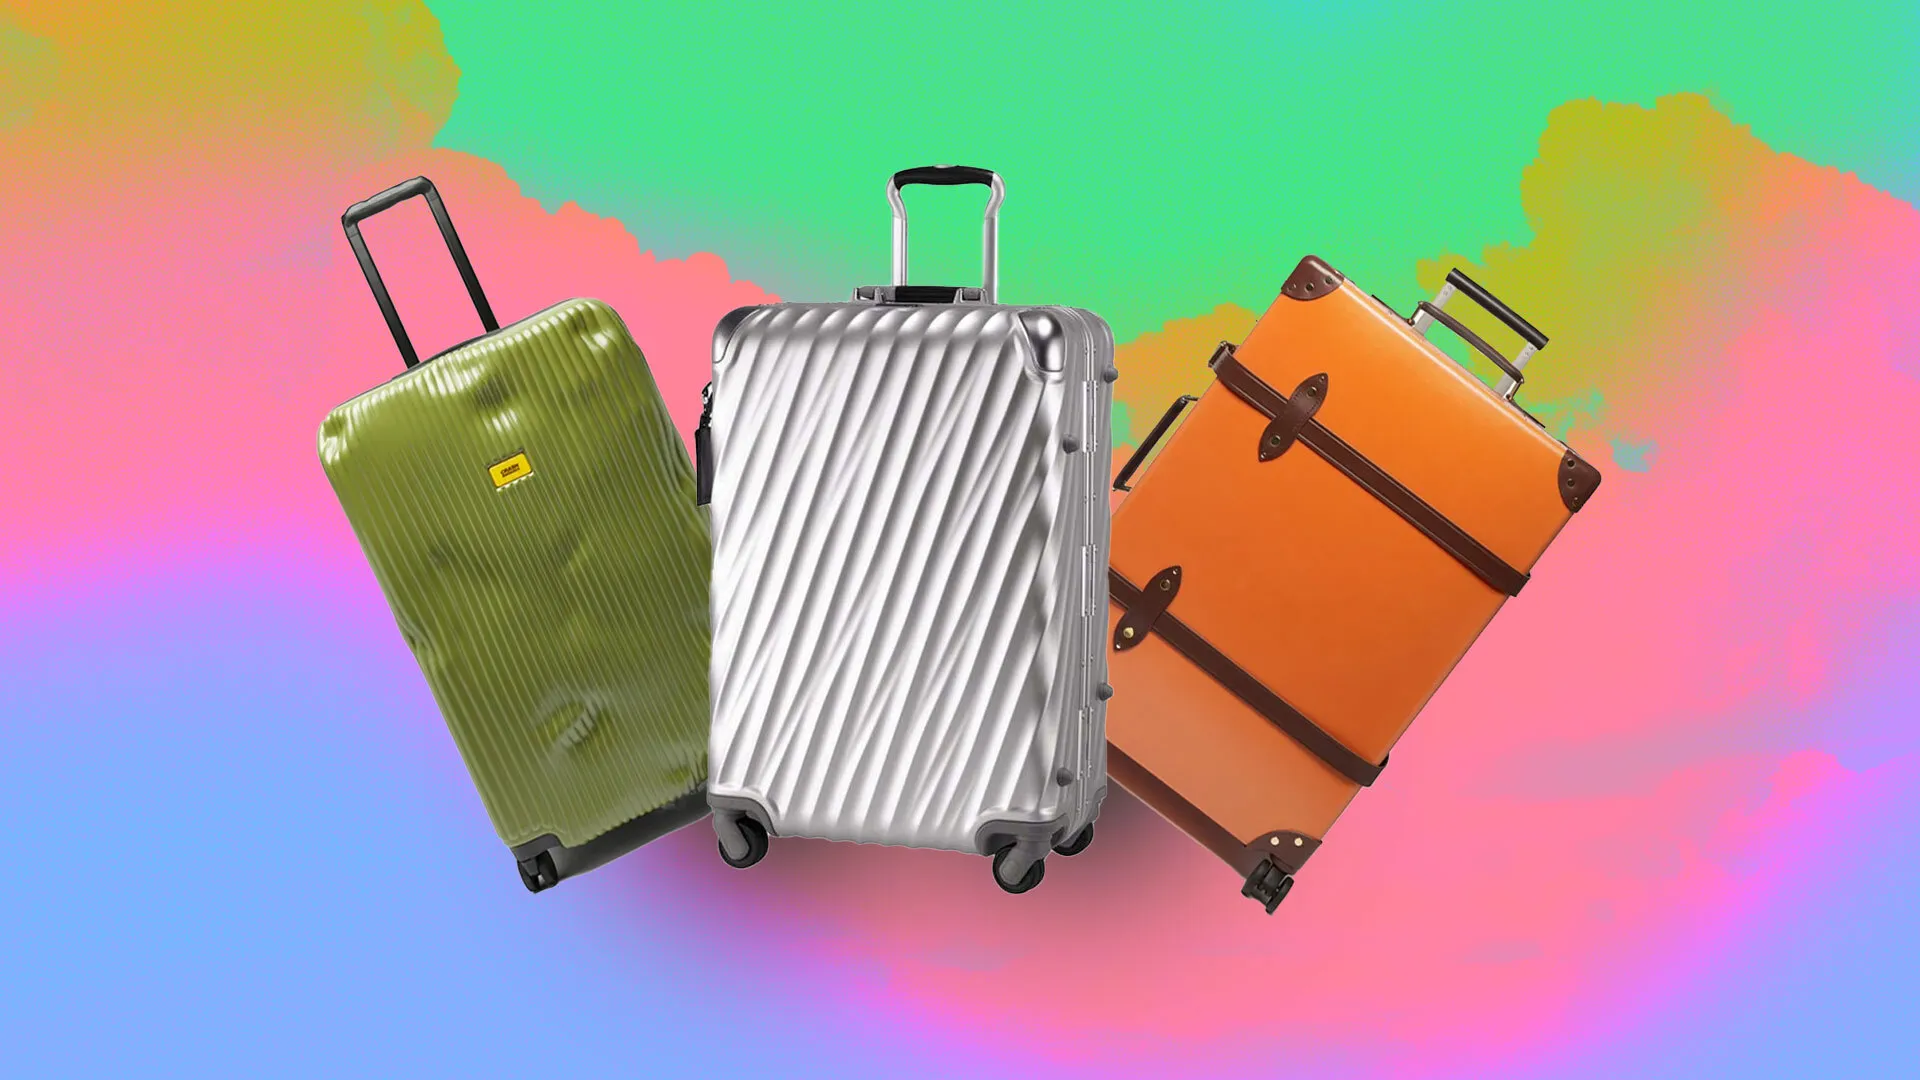 A collection of colourful luggage